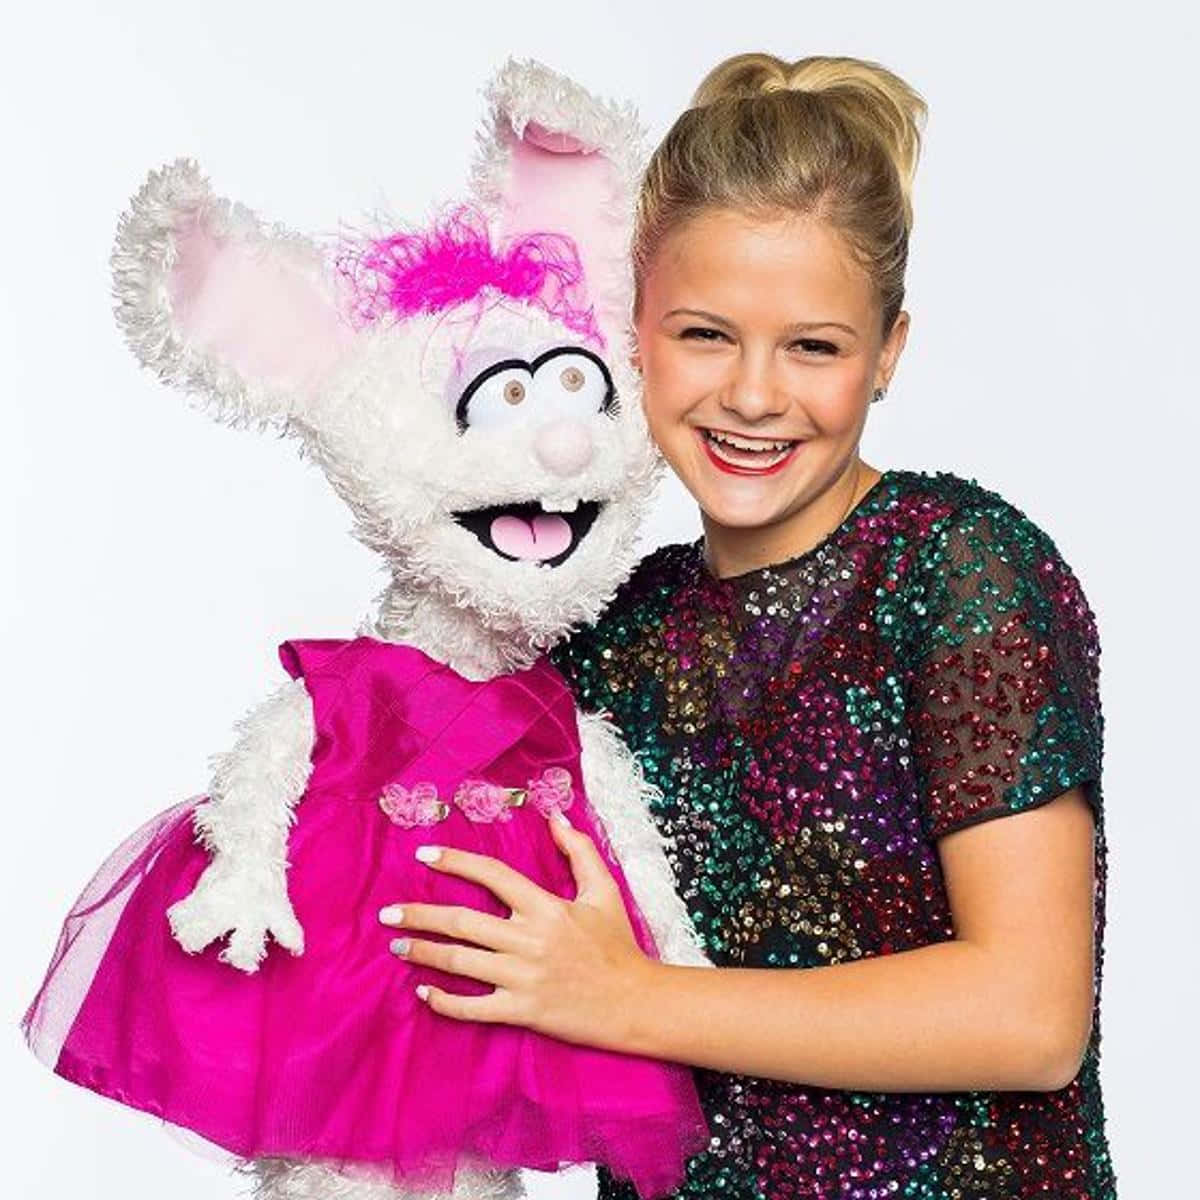 A Girl In A Pink Dress Holding A Stuffed Animal